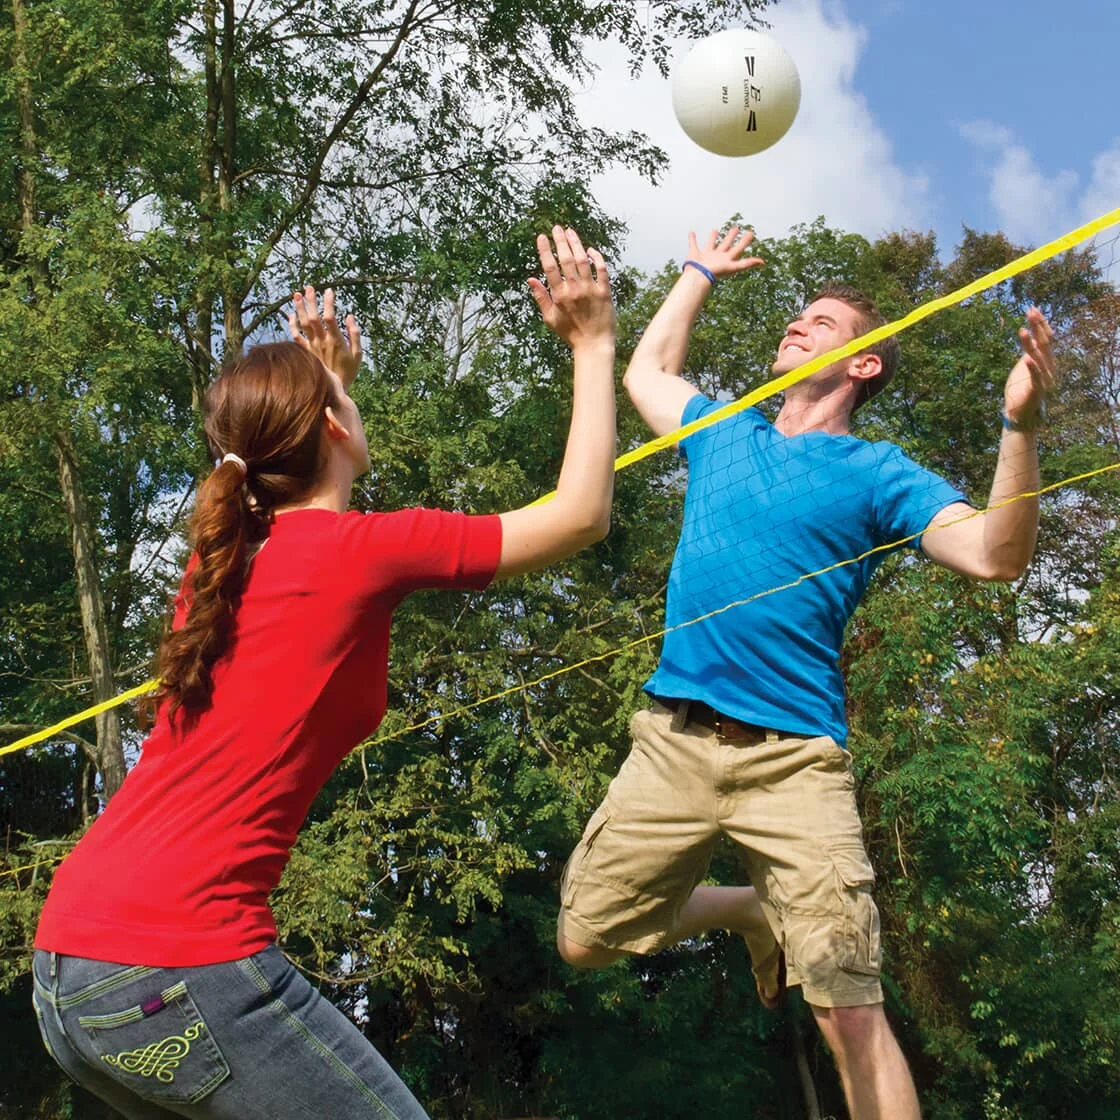 Lawn Games for Outdoor Fun